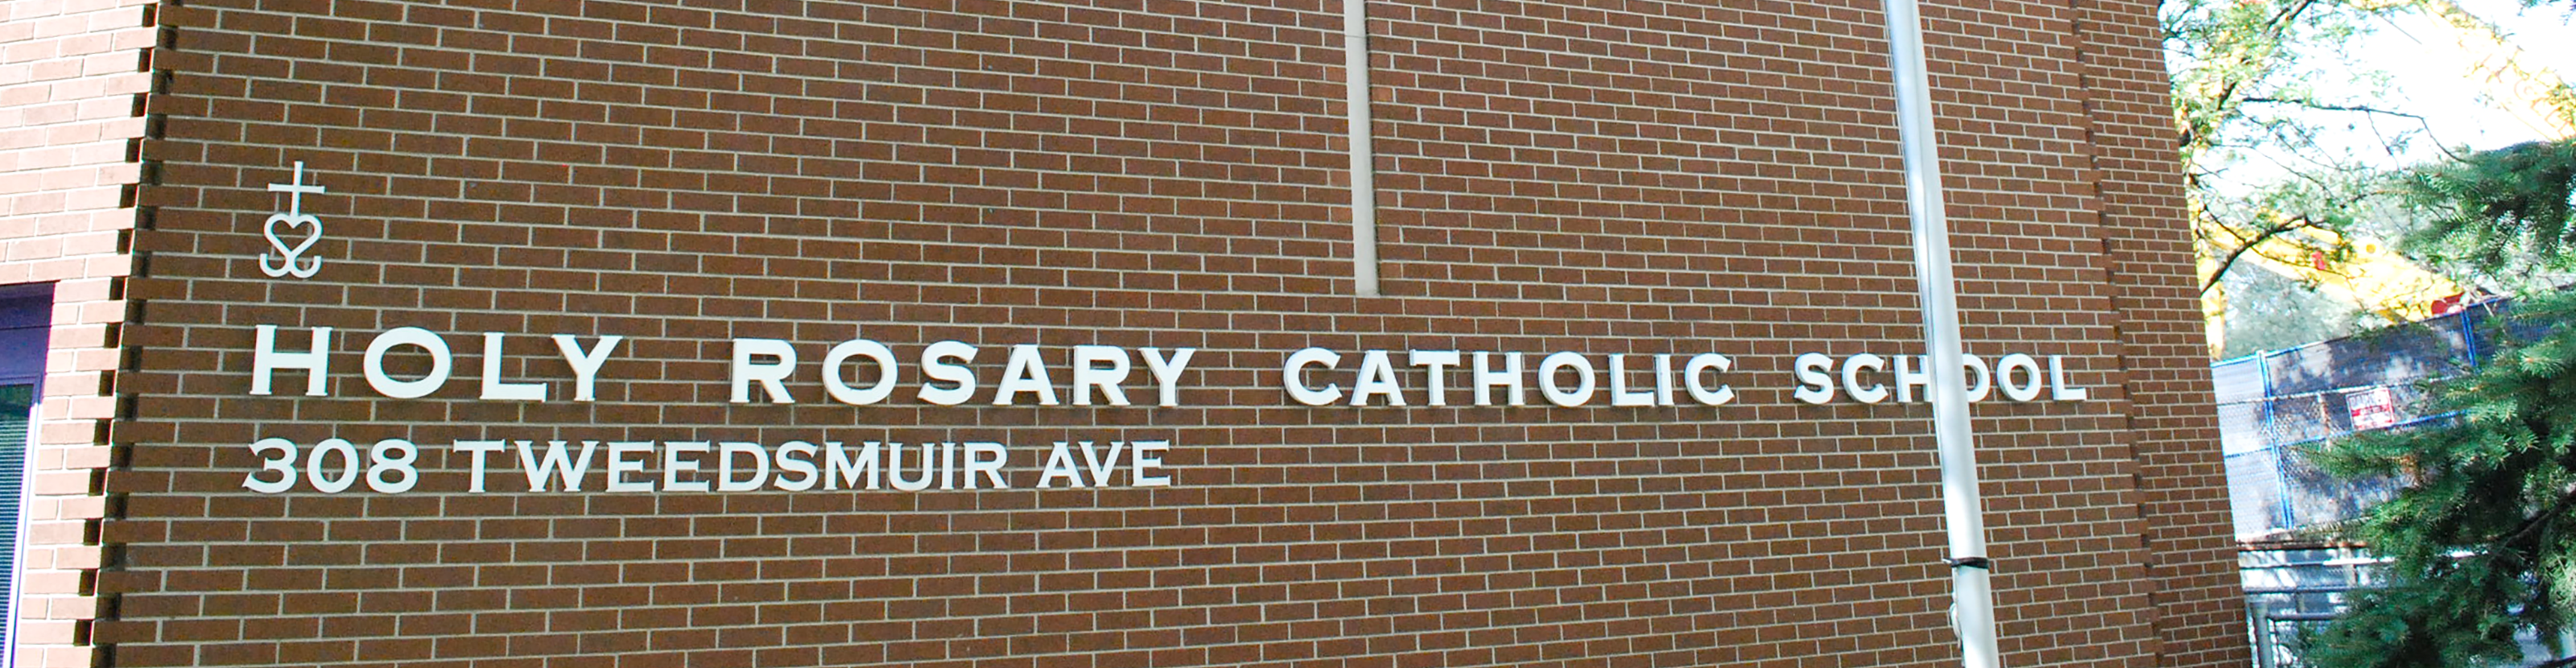 The front of the Holy Rosary Catholic School building